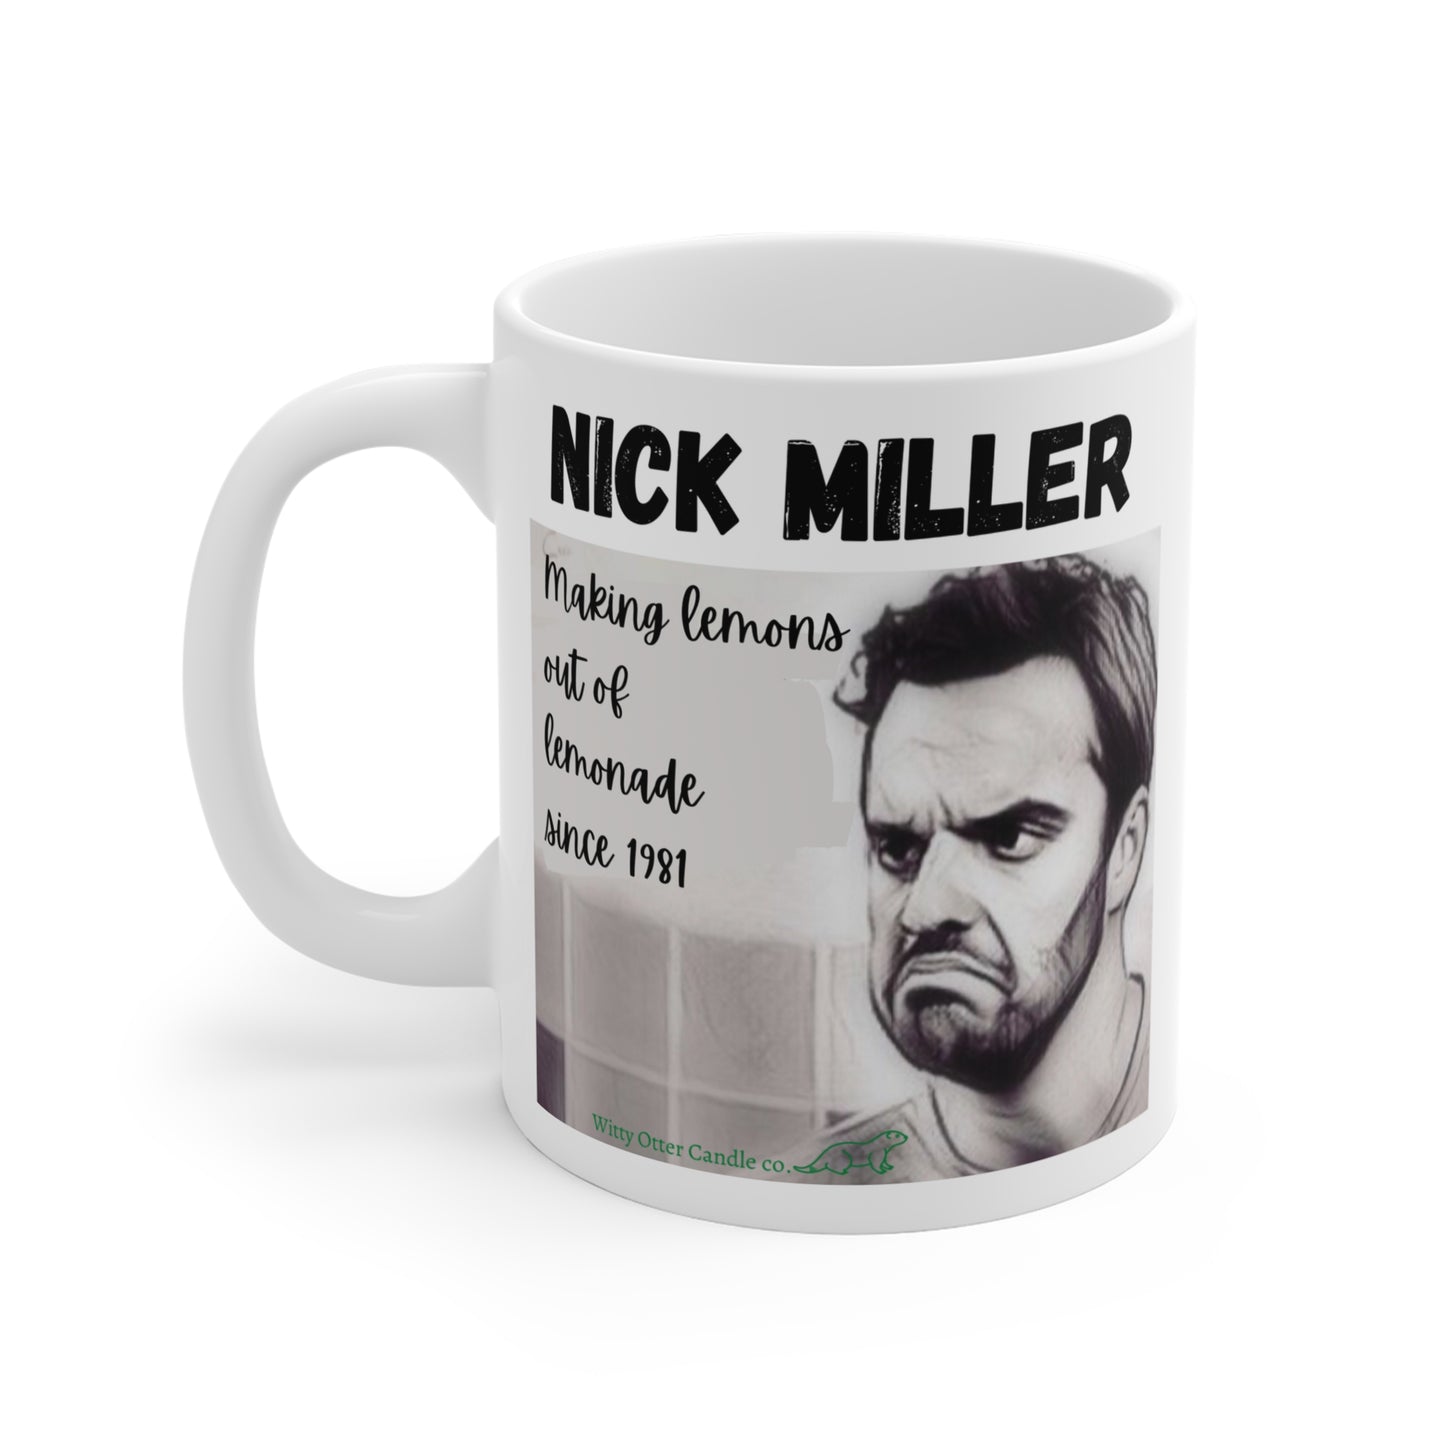 Nick Miller Coffee mug, Funny New Girl quote coffee cup, New Girl fan gift